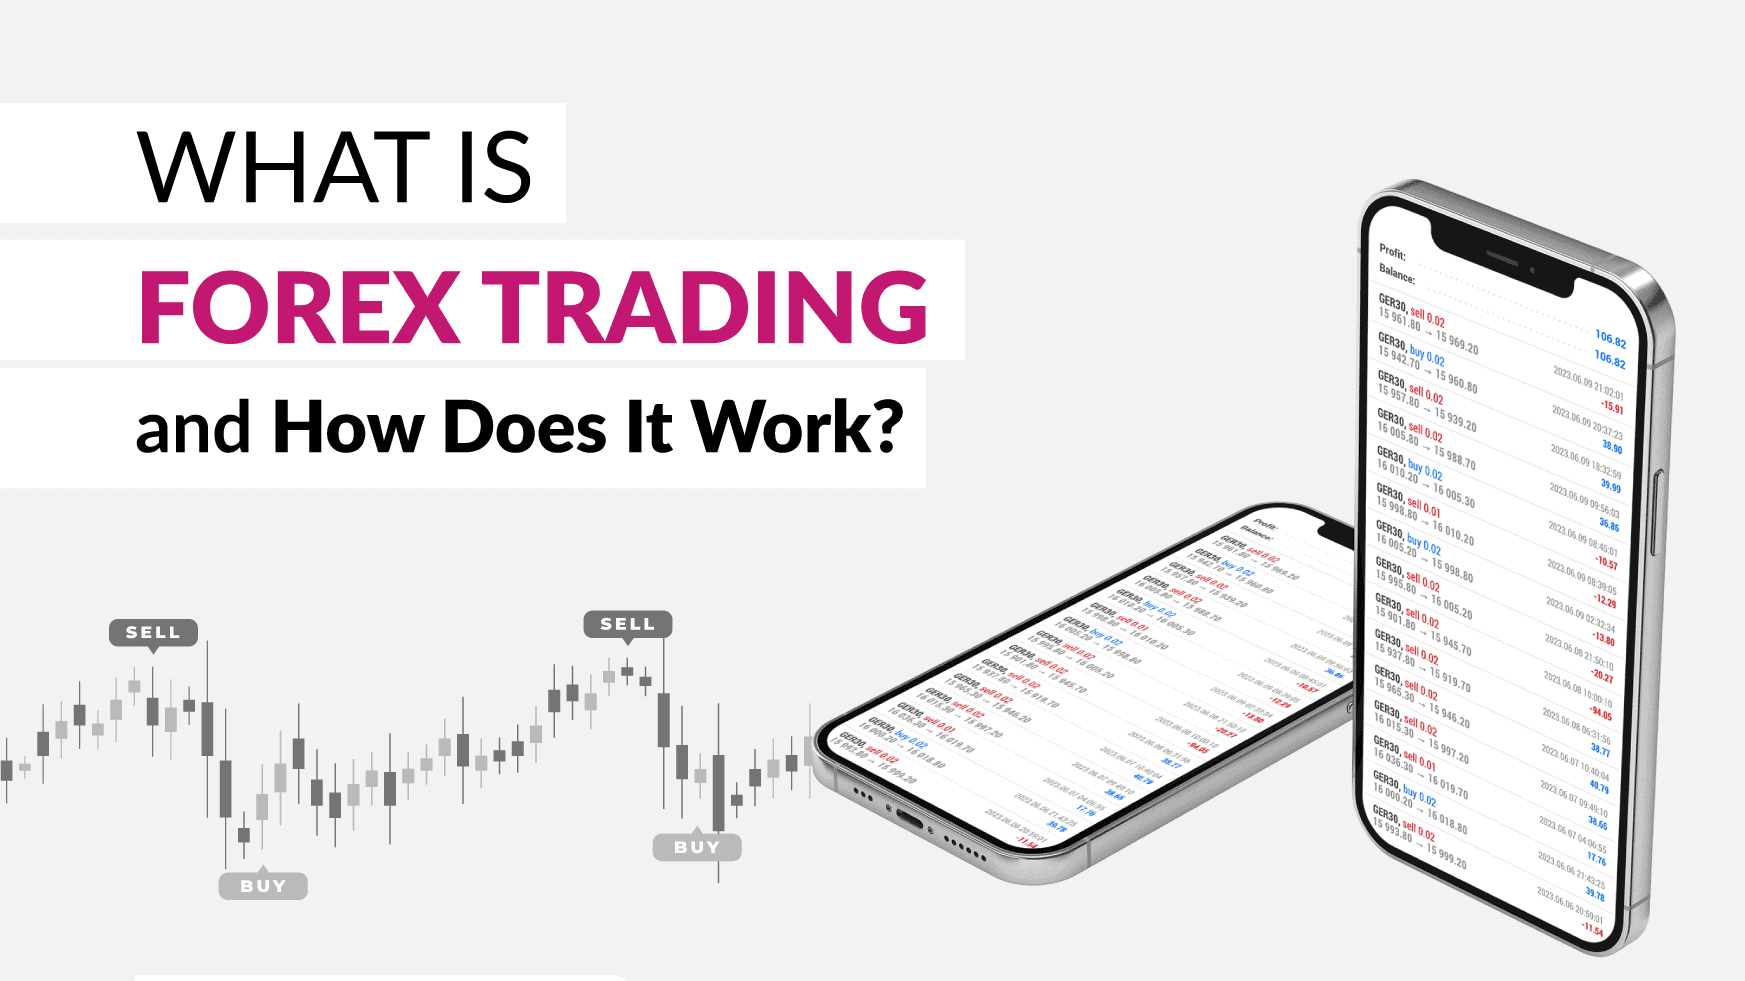 WHAT IS

FOREX TRADING
and How Does It Work?

   

Bae
ay —